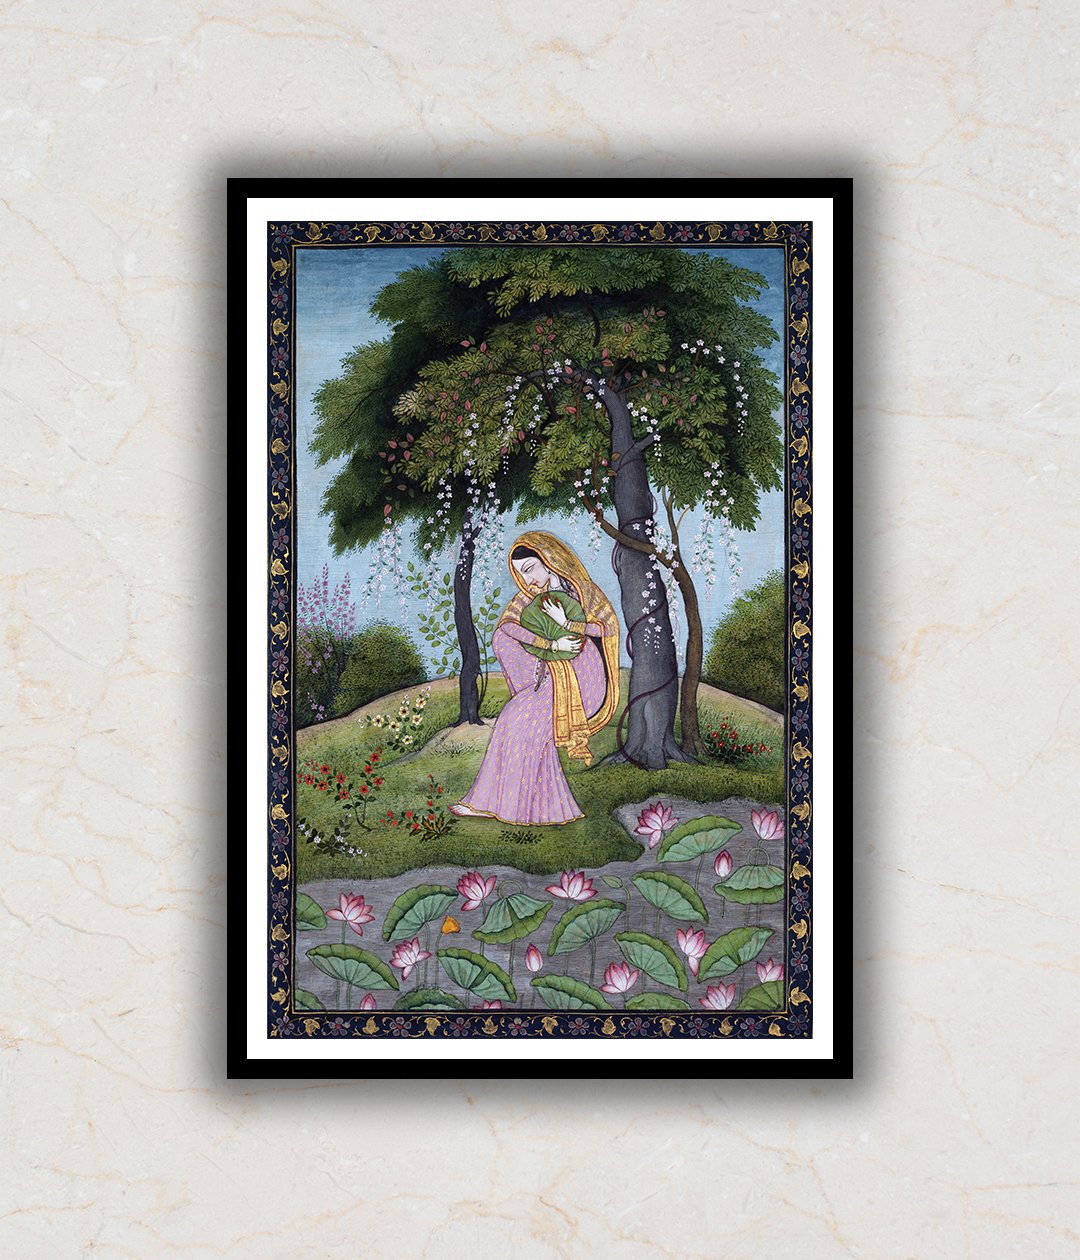 Woman in Forest Rajasthani Art Painting For Home Wall Art Decor